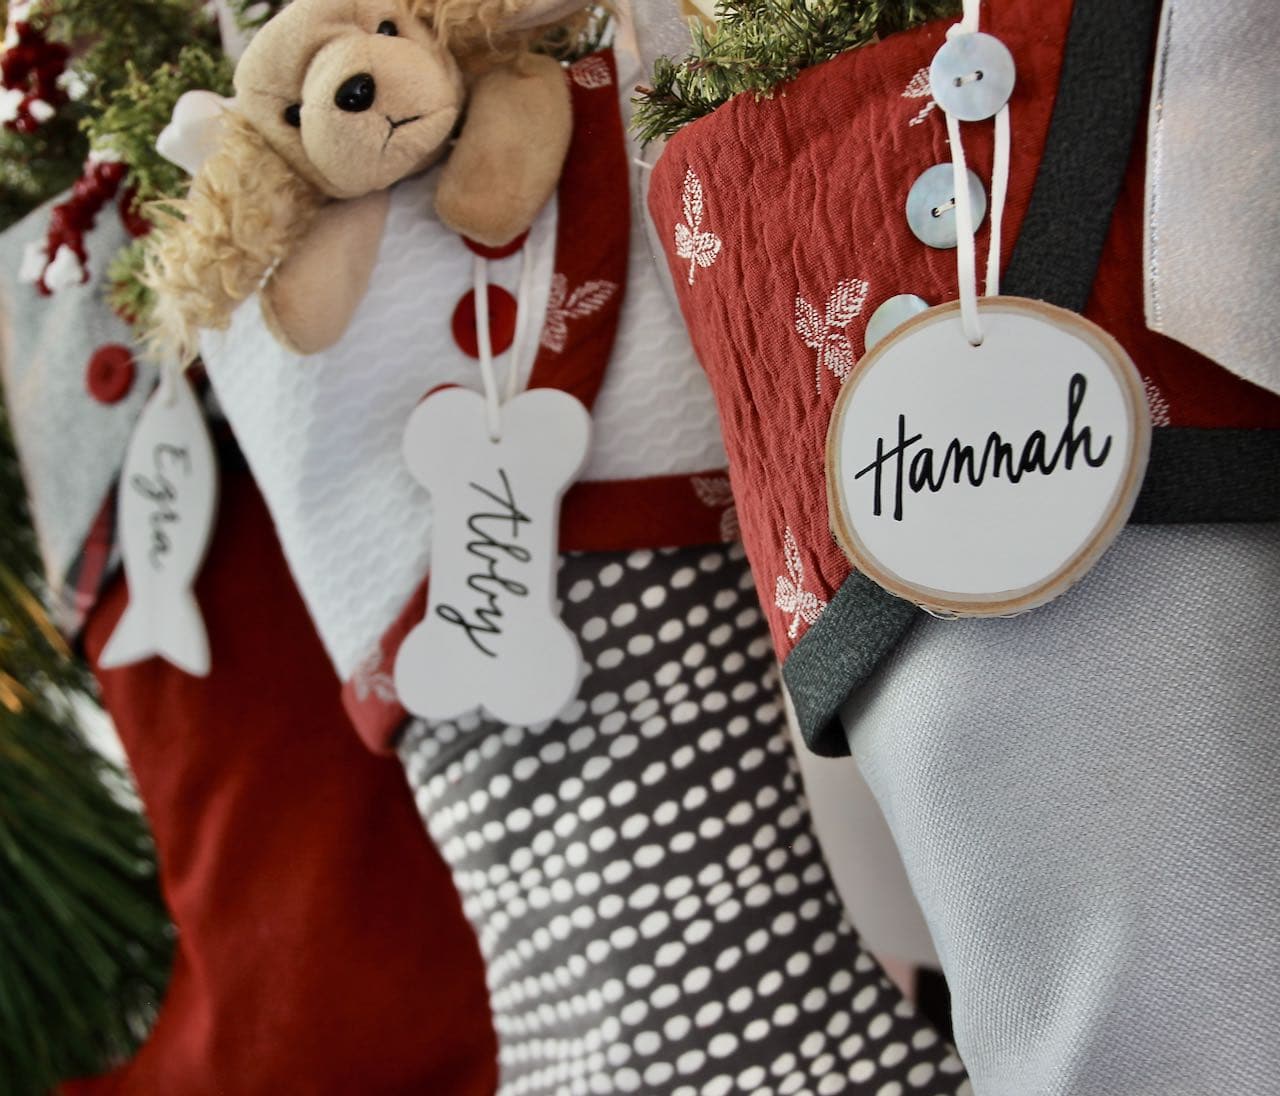 Closeup of 3 Preppy Christmas stockings with white name tags